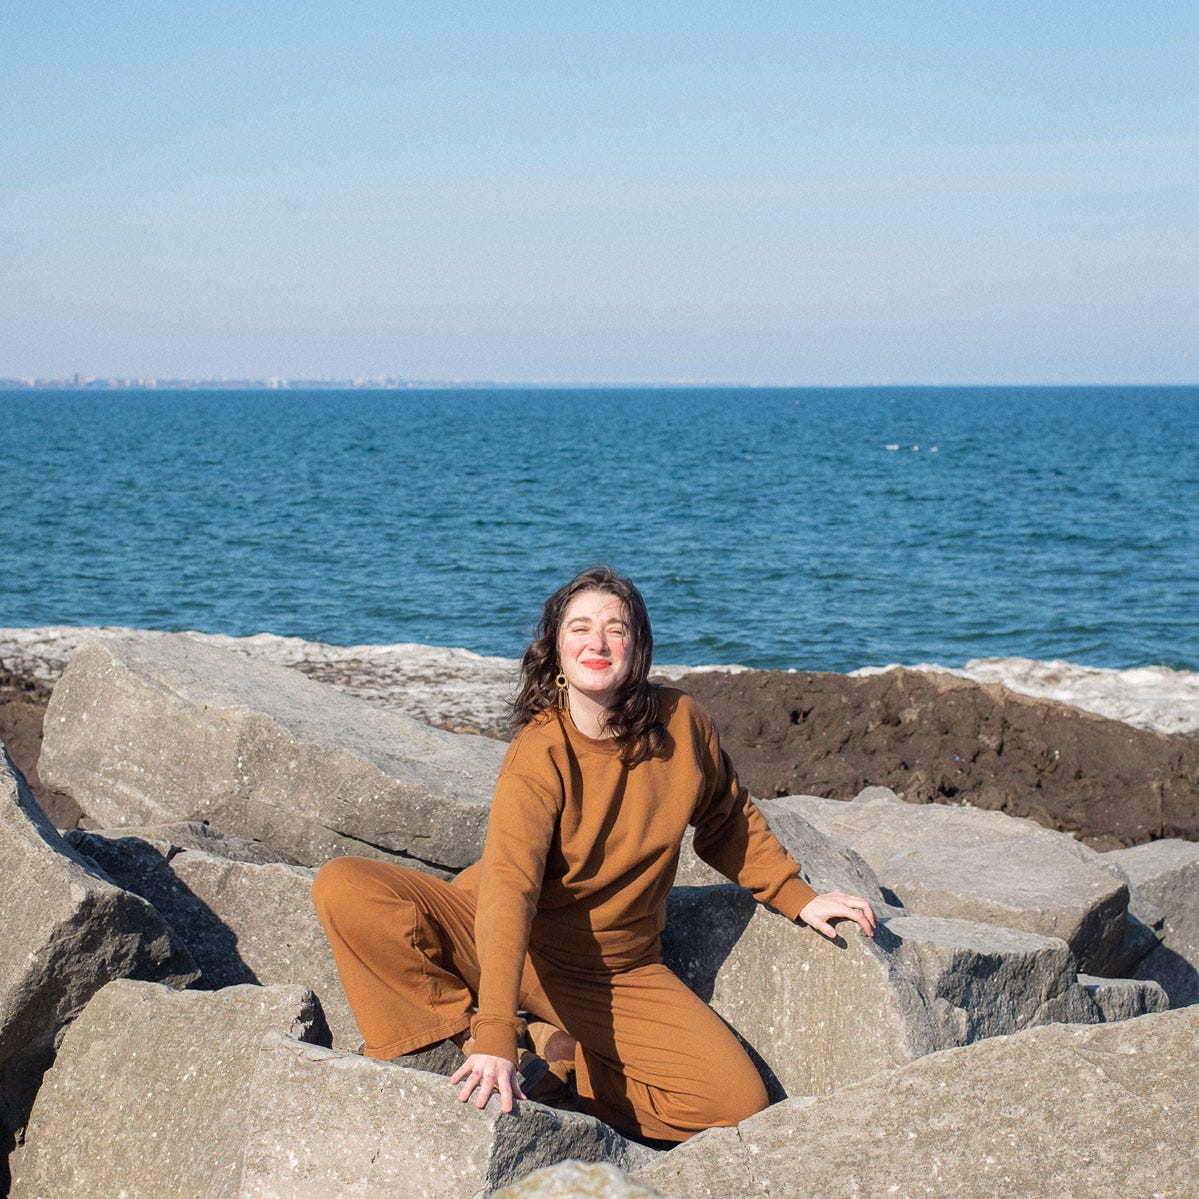 phoebe sitting in the rocks along the bech. She is crouching down in a brown sweat suit smiling and squinting in the sun, her cheeks are rosy from the wind and cold